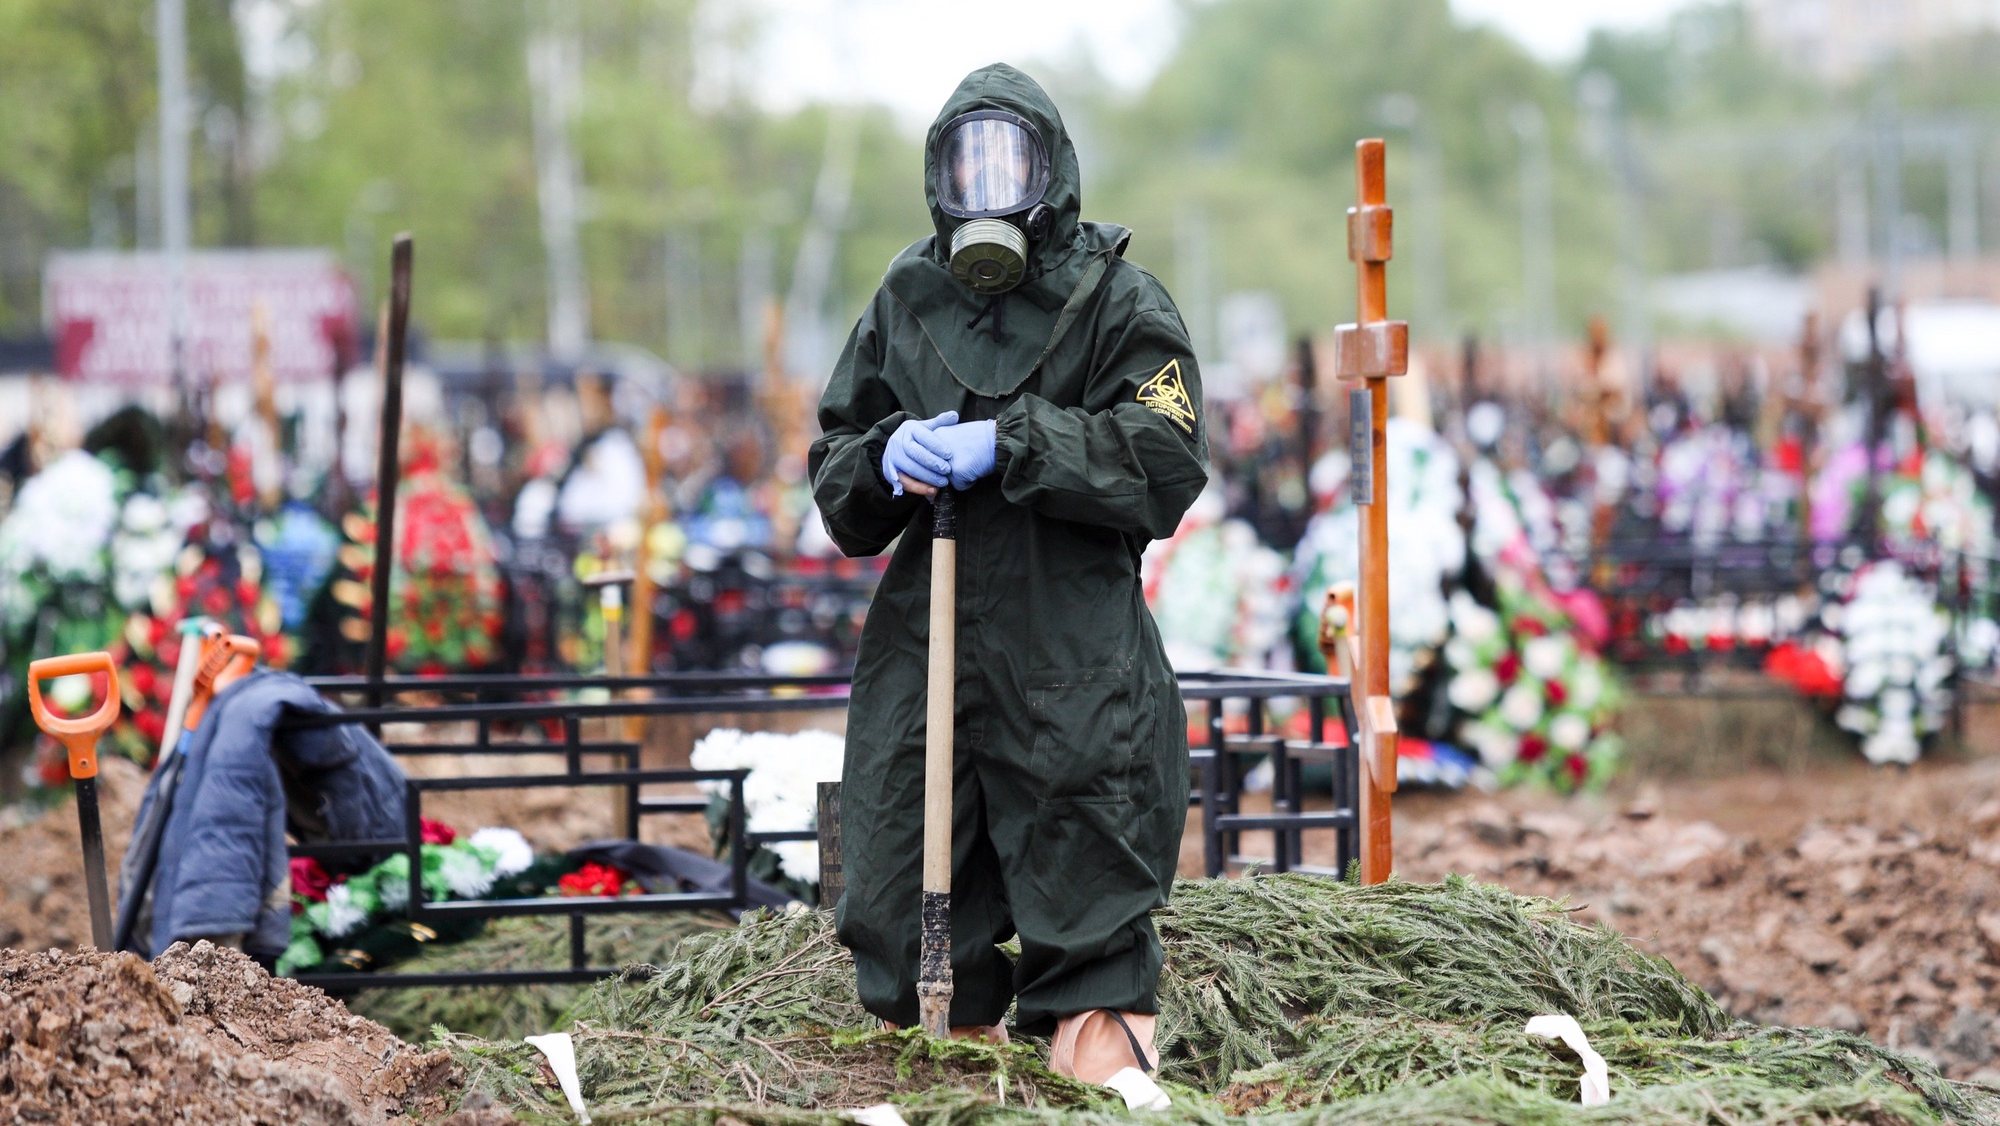 epa08424203 A handout picture made available by Moscow News Agency shows a cemetery worker wearing a protective suit during a burial ceremony of COVID-19 victim at the Butovskoye Cemetery in Moscow, Russia, 15 May 2020. According to official data, as of 15 May 2020, the total number of deaths in Russia from COVID-19 disease which is caused by SARS-CoV-2 coronavirus, exceeded 2,400 people, with over 1,350 in Moscow.  EPA/Zykov Kirill / Moscow News Agency Handout MANDATORY CREDIT / HANDOUT EDITORIAL USE ONLY/NO SALES